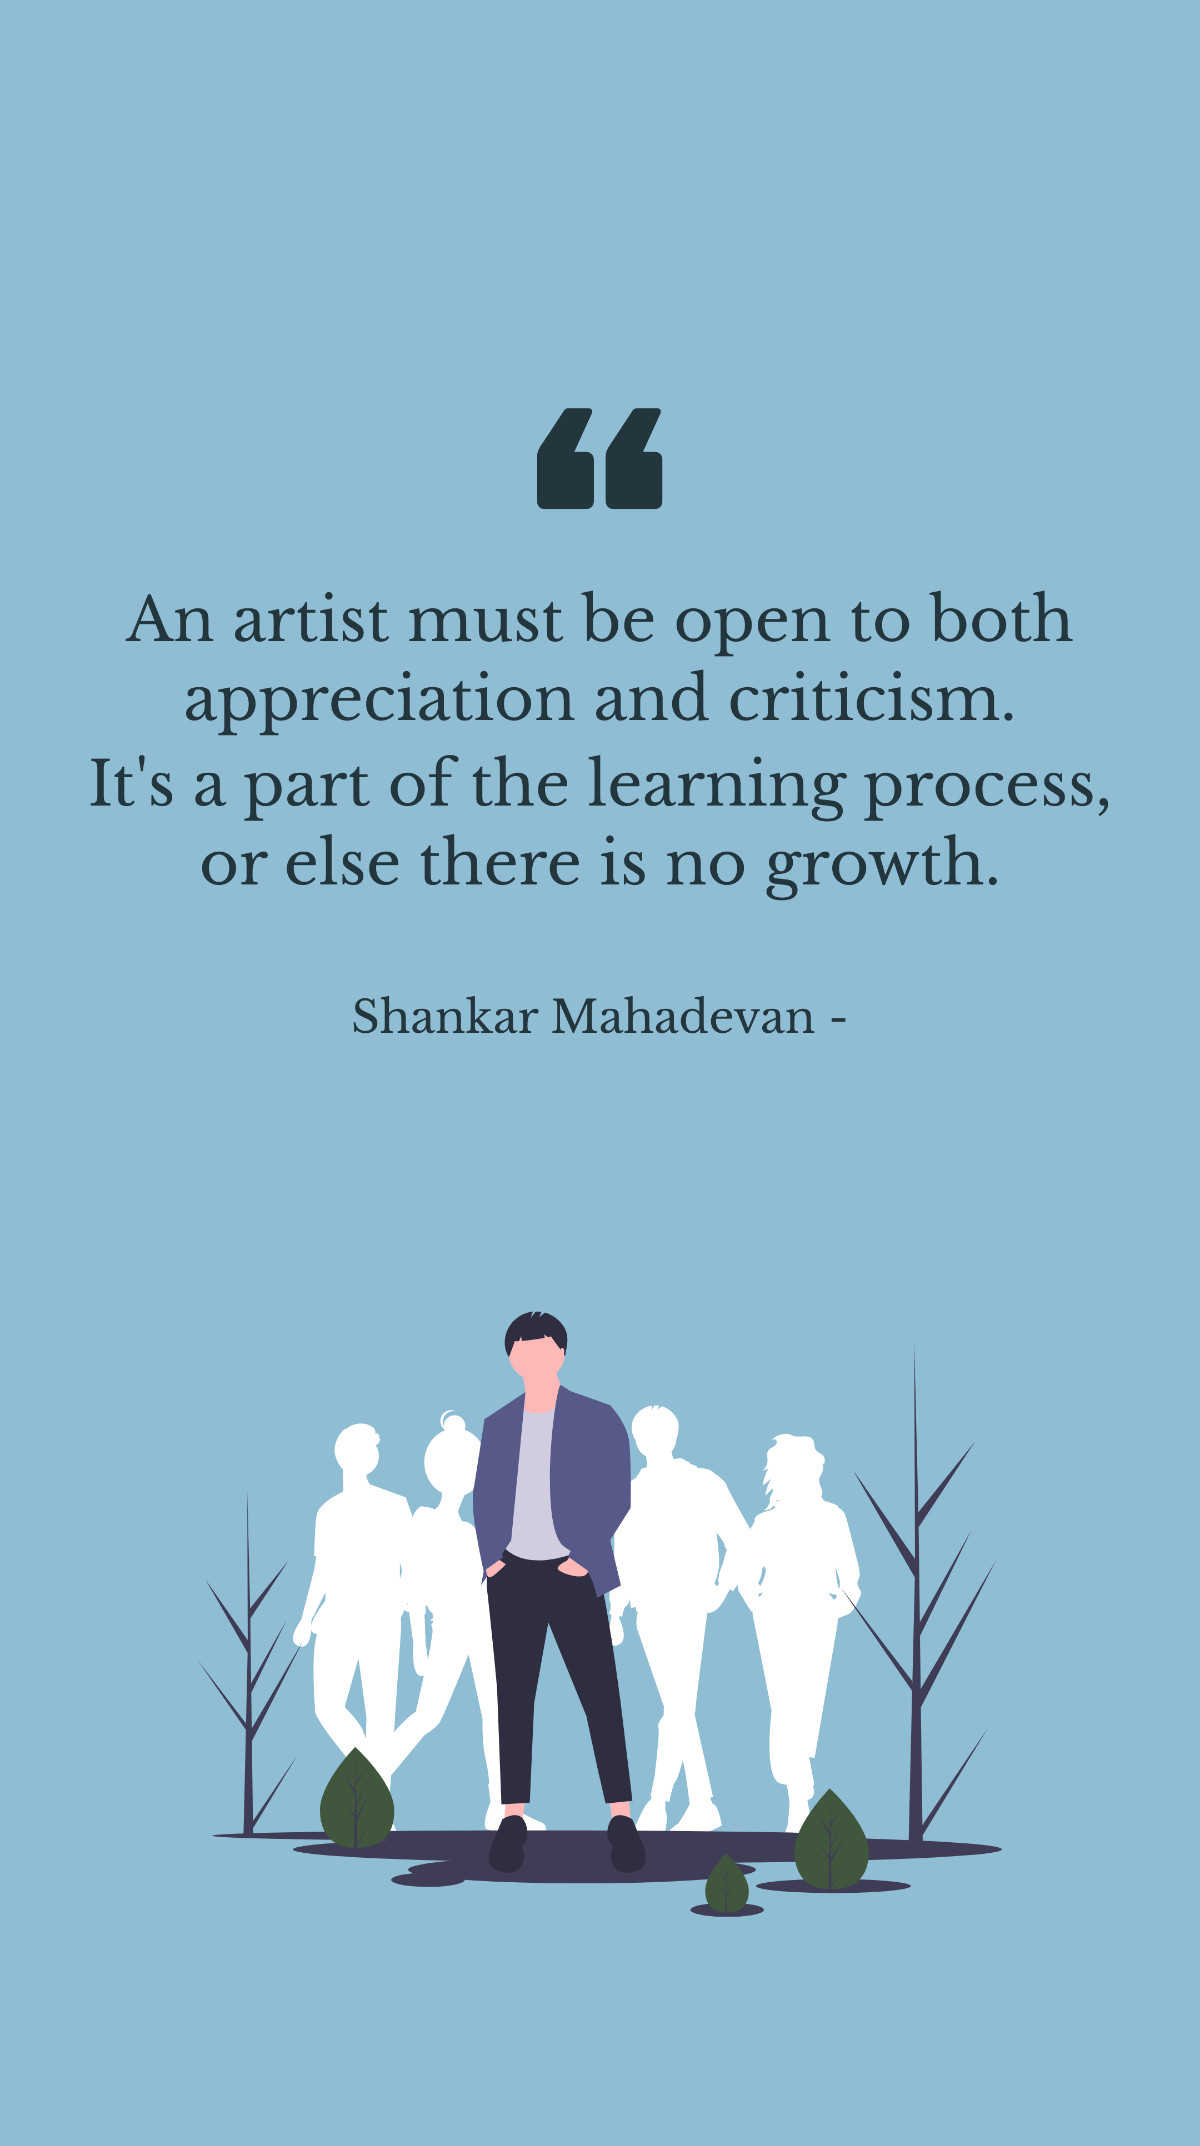 Shankar Mahadevan - An artist must be open to both appreciation and criticism. It's a part of the learning process, or else there is no growth. Template